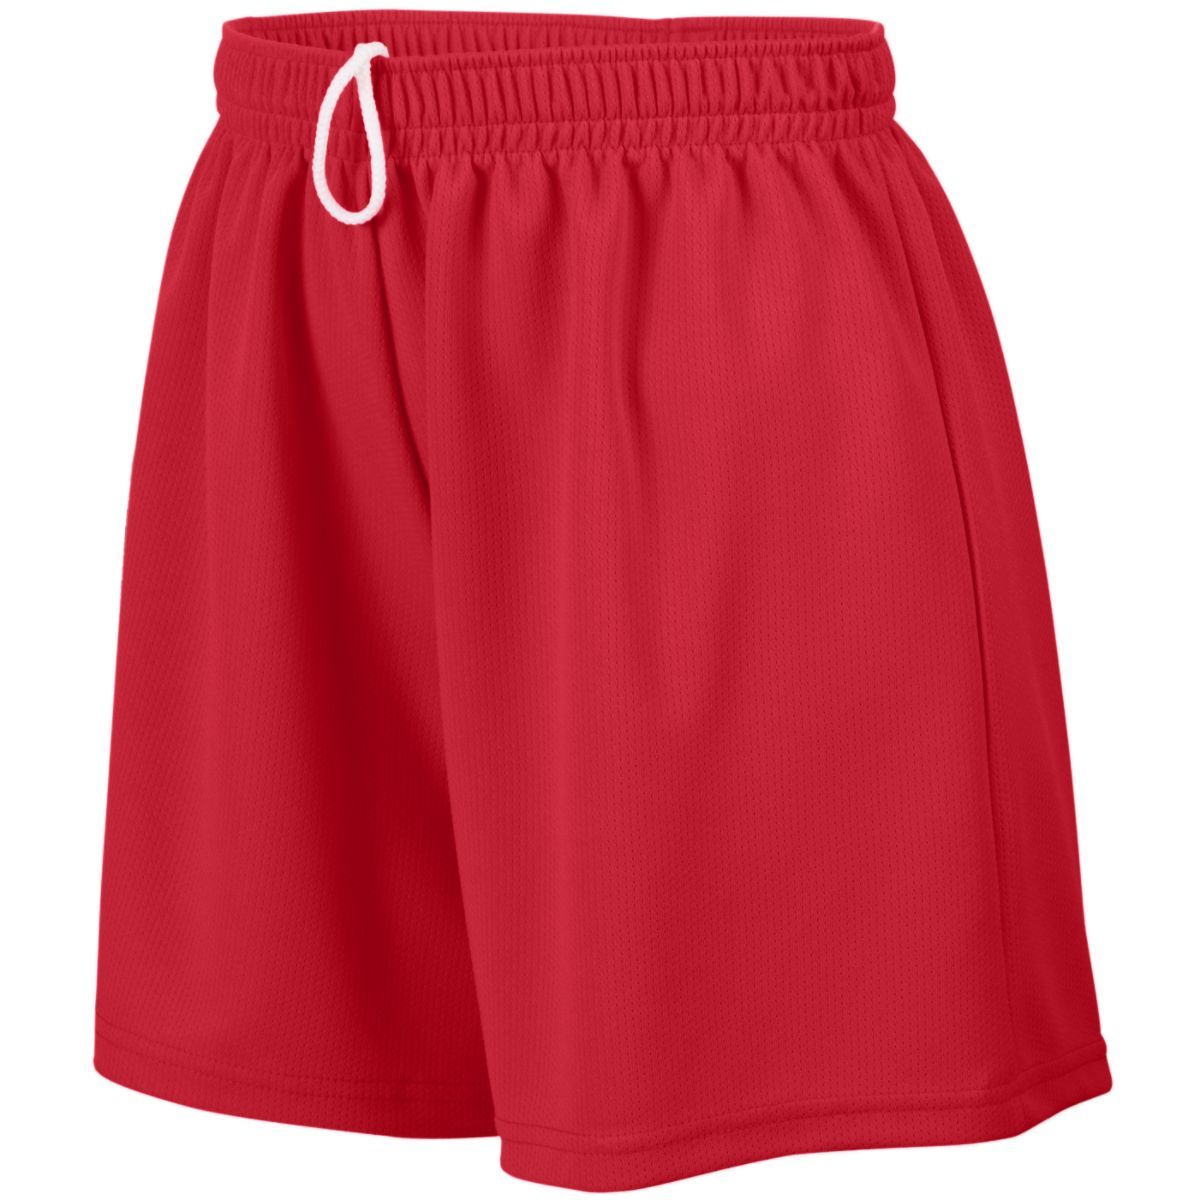 Augusta Sportswear Girls Wicking Mesh Shorts in Red  -Part of the Girls, Augusta-Products, Lacrosse, Girls-Shorts, All-Sports, All-Sports-1 product lines at KanaleyCreations.com